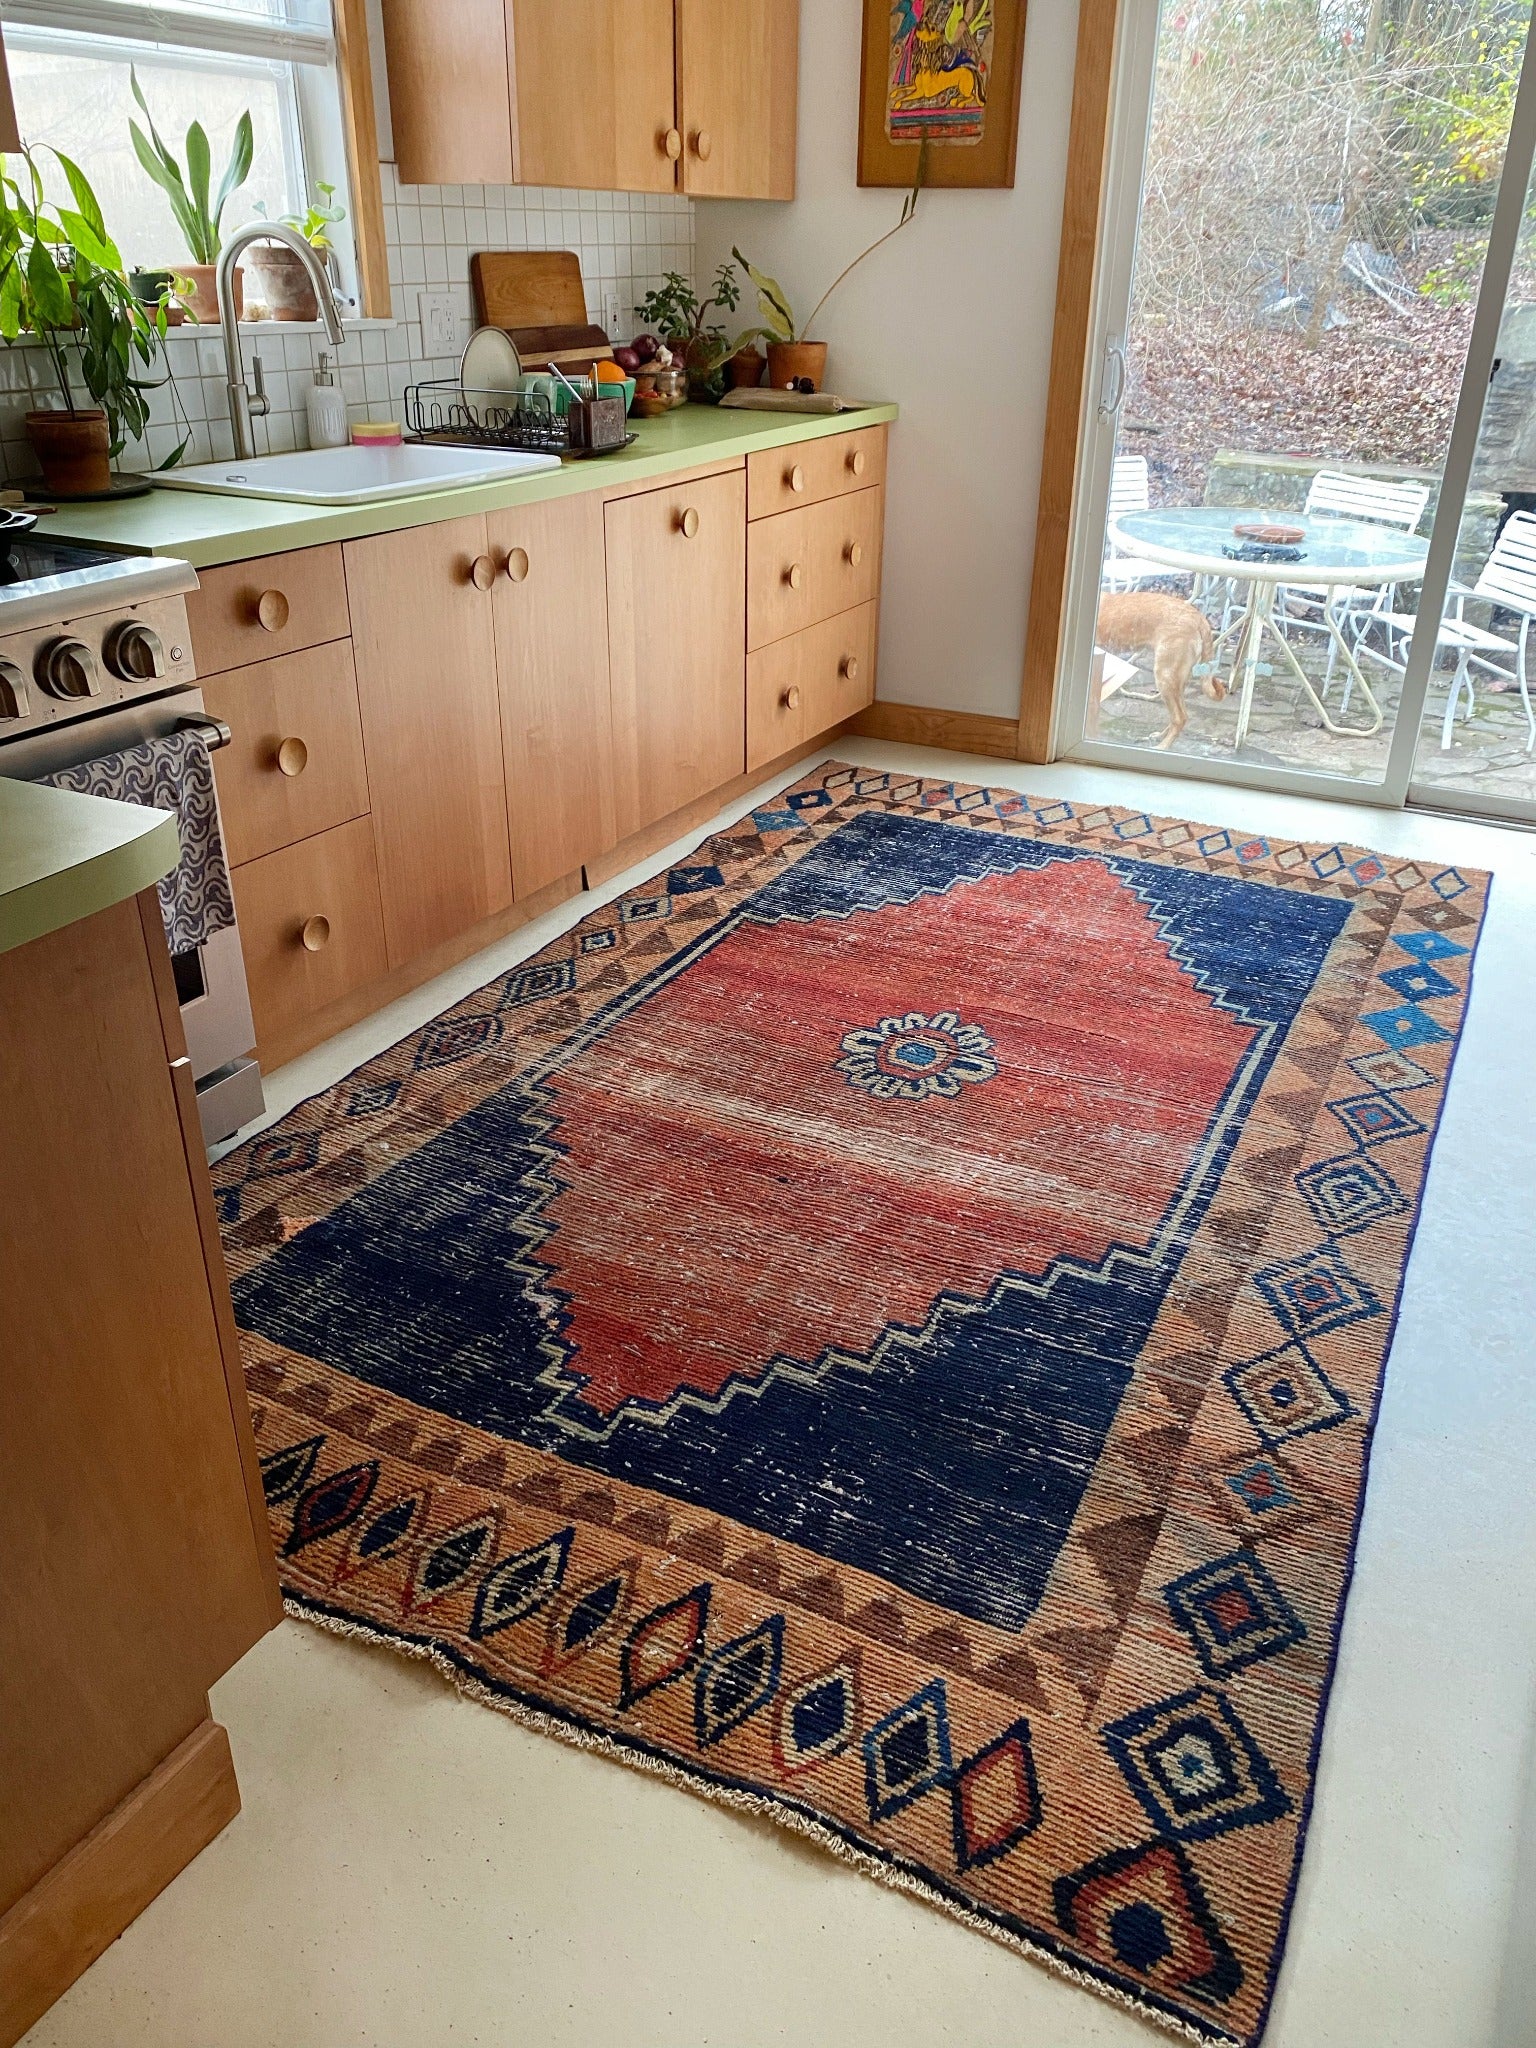 See Zamia vintage Persian Rug in a Kitchen